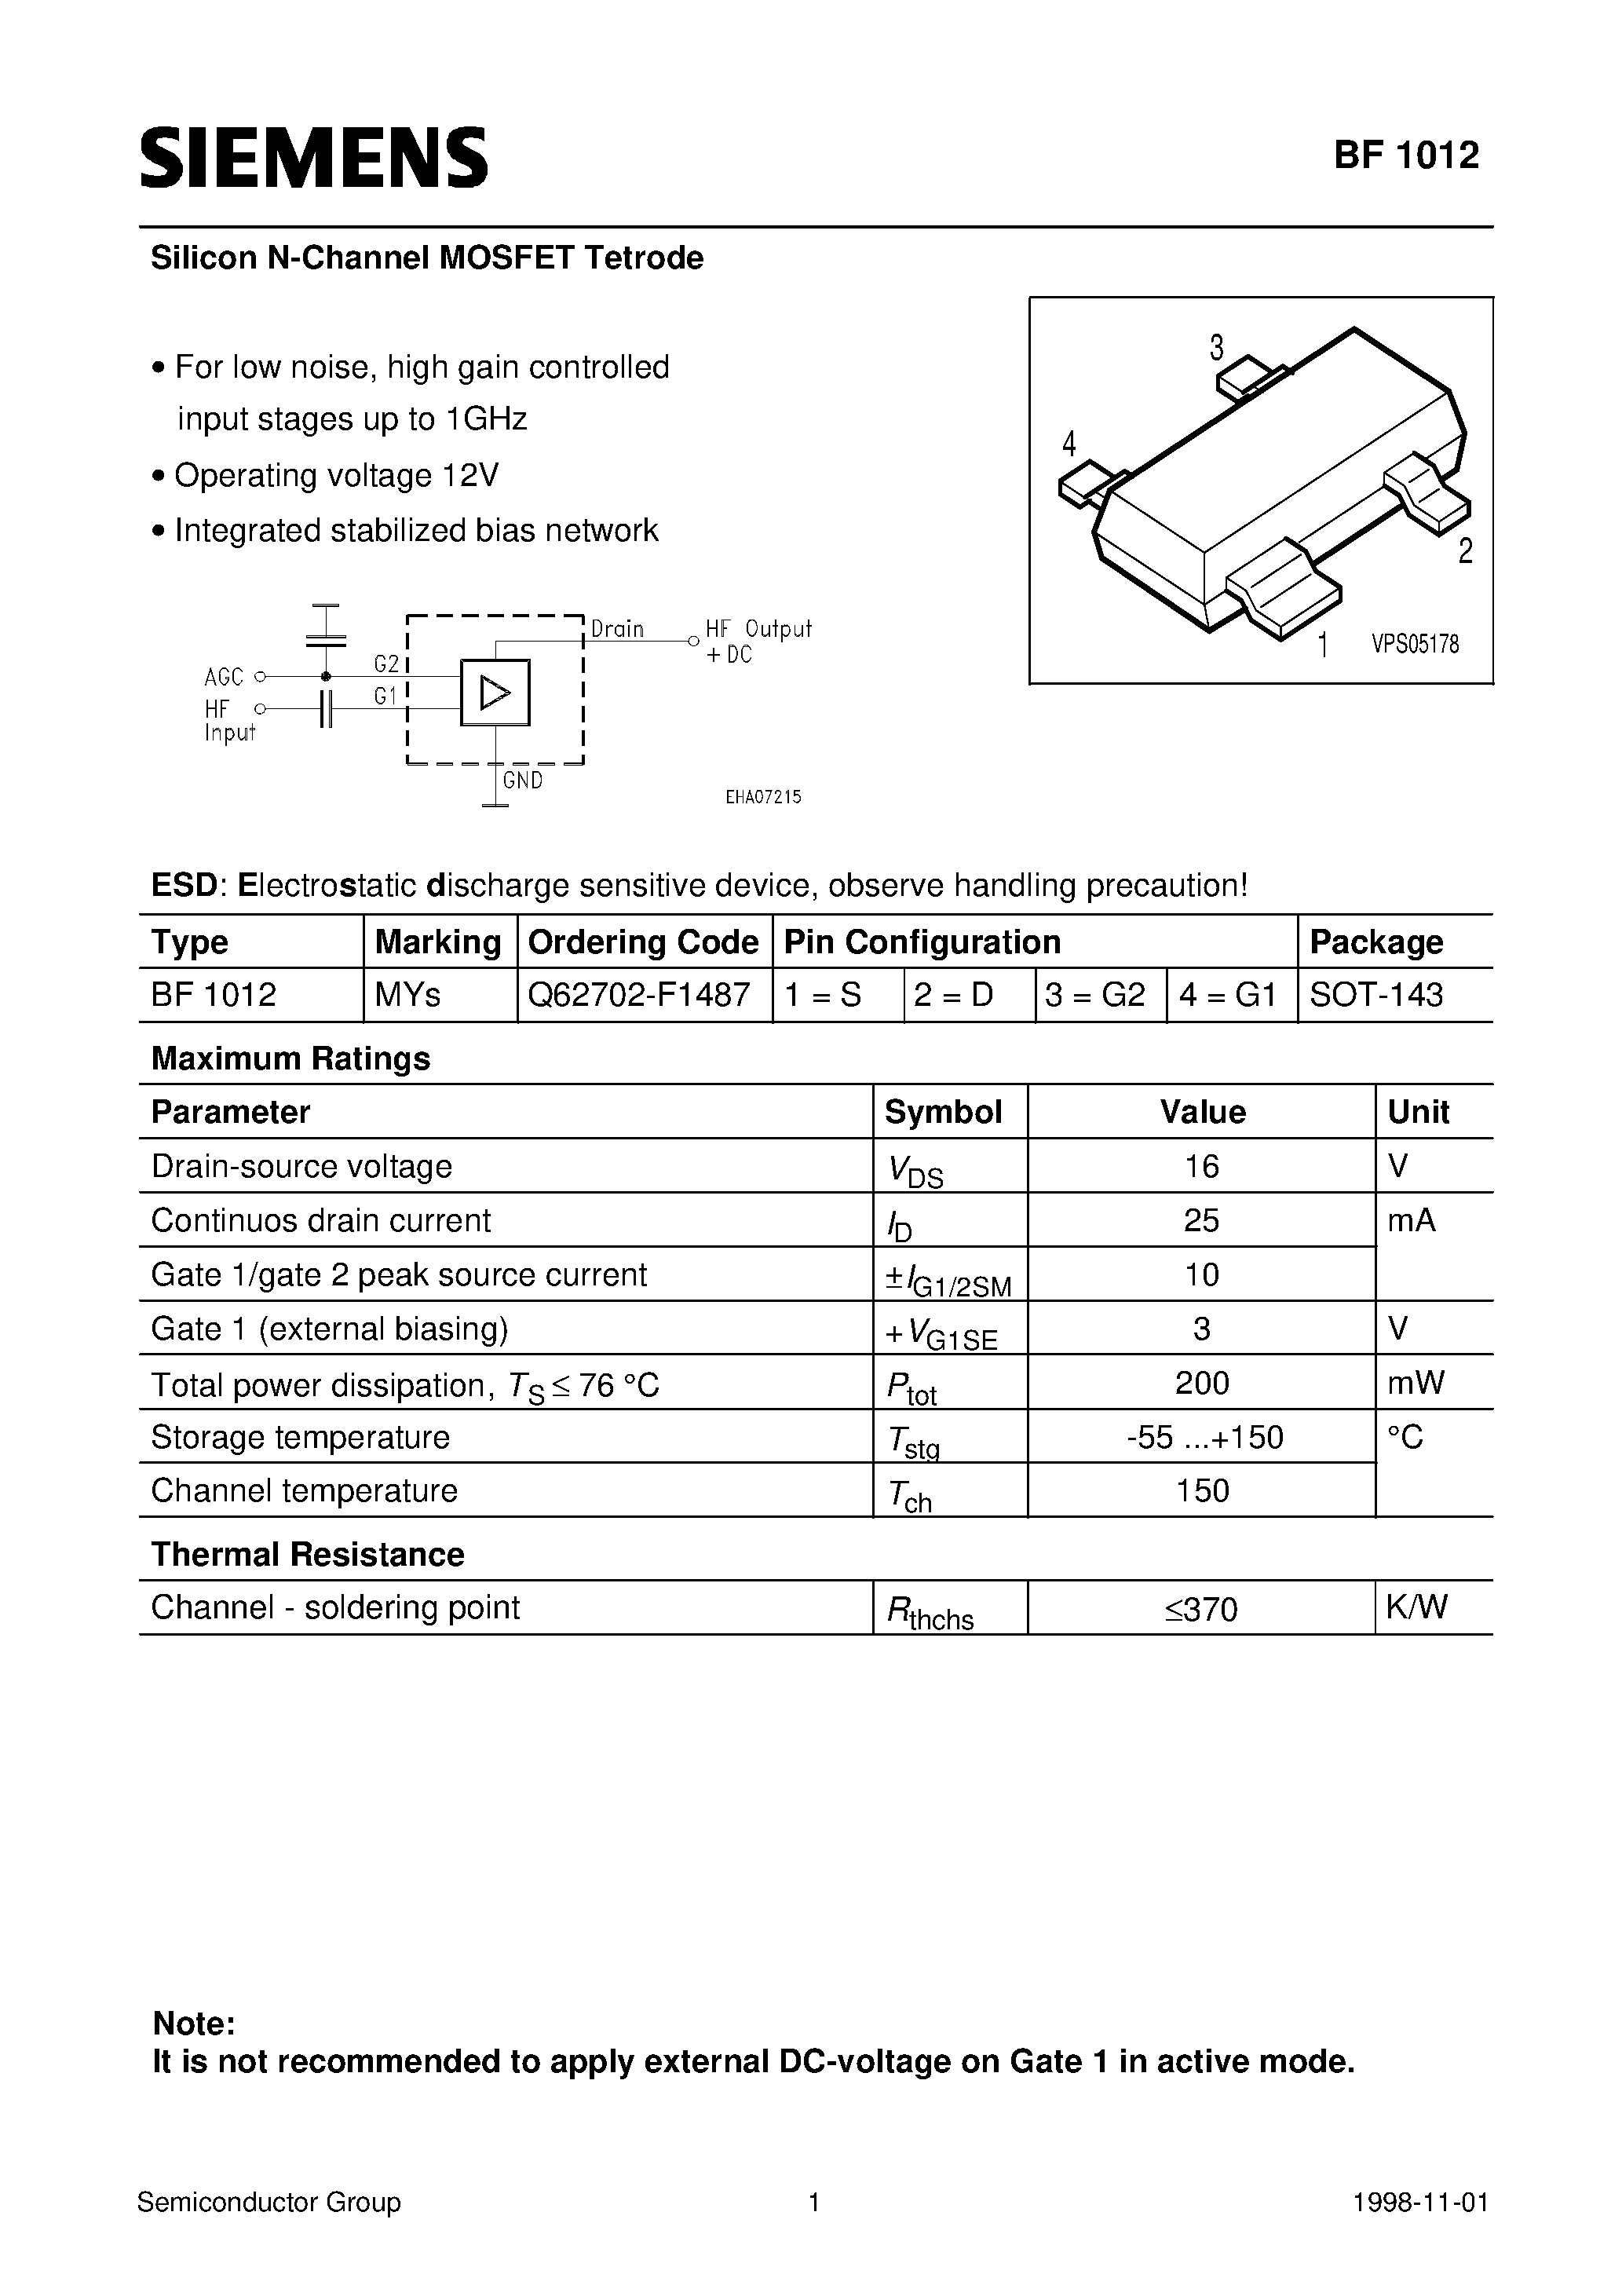 Datasheet BF1012 - Silicon N-Channel MOSFET Tetrode (For low noise/ high gain controlled input stages up to 1GHz Operating voltage 12V Integrated stabilized bias network page 1